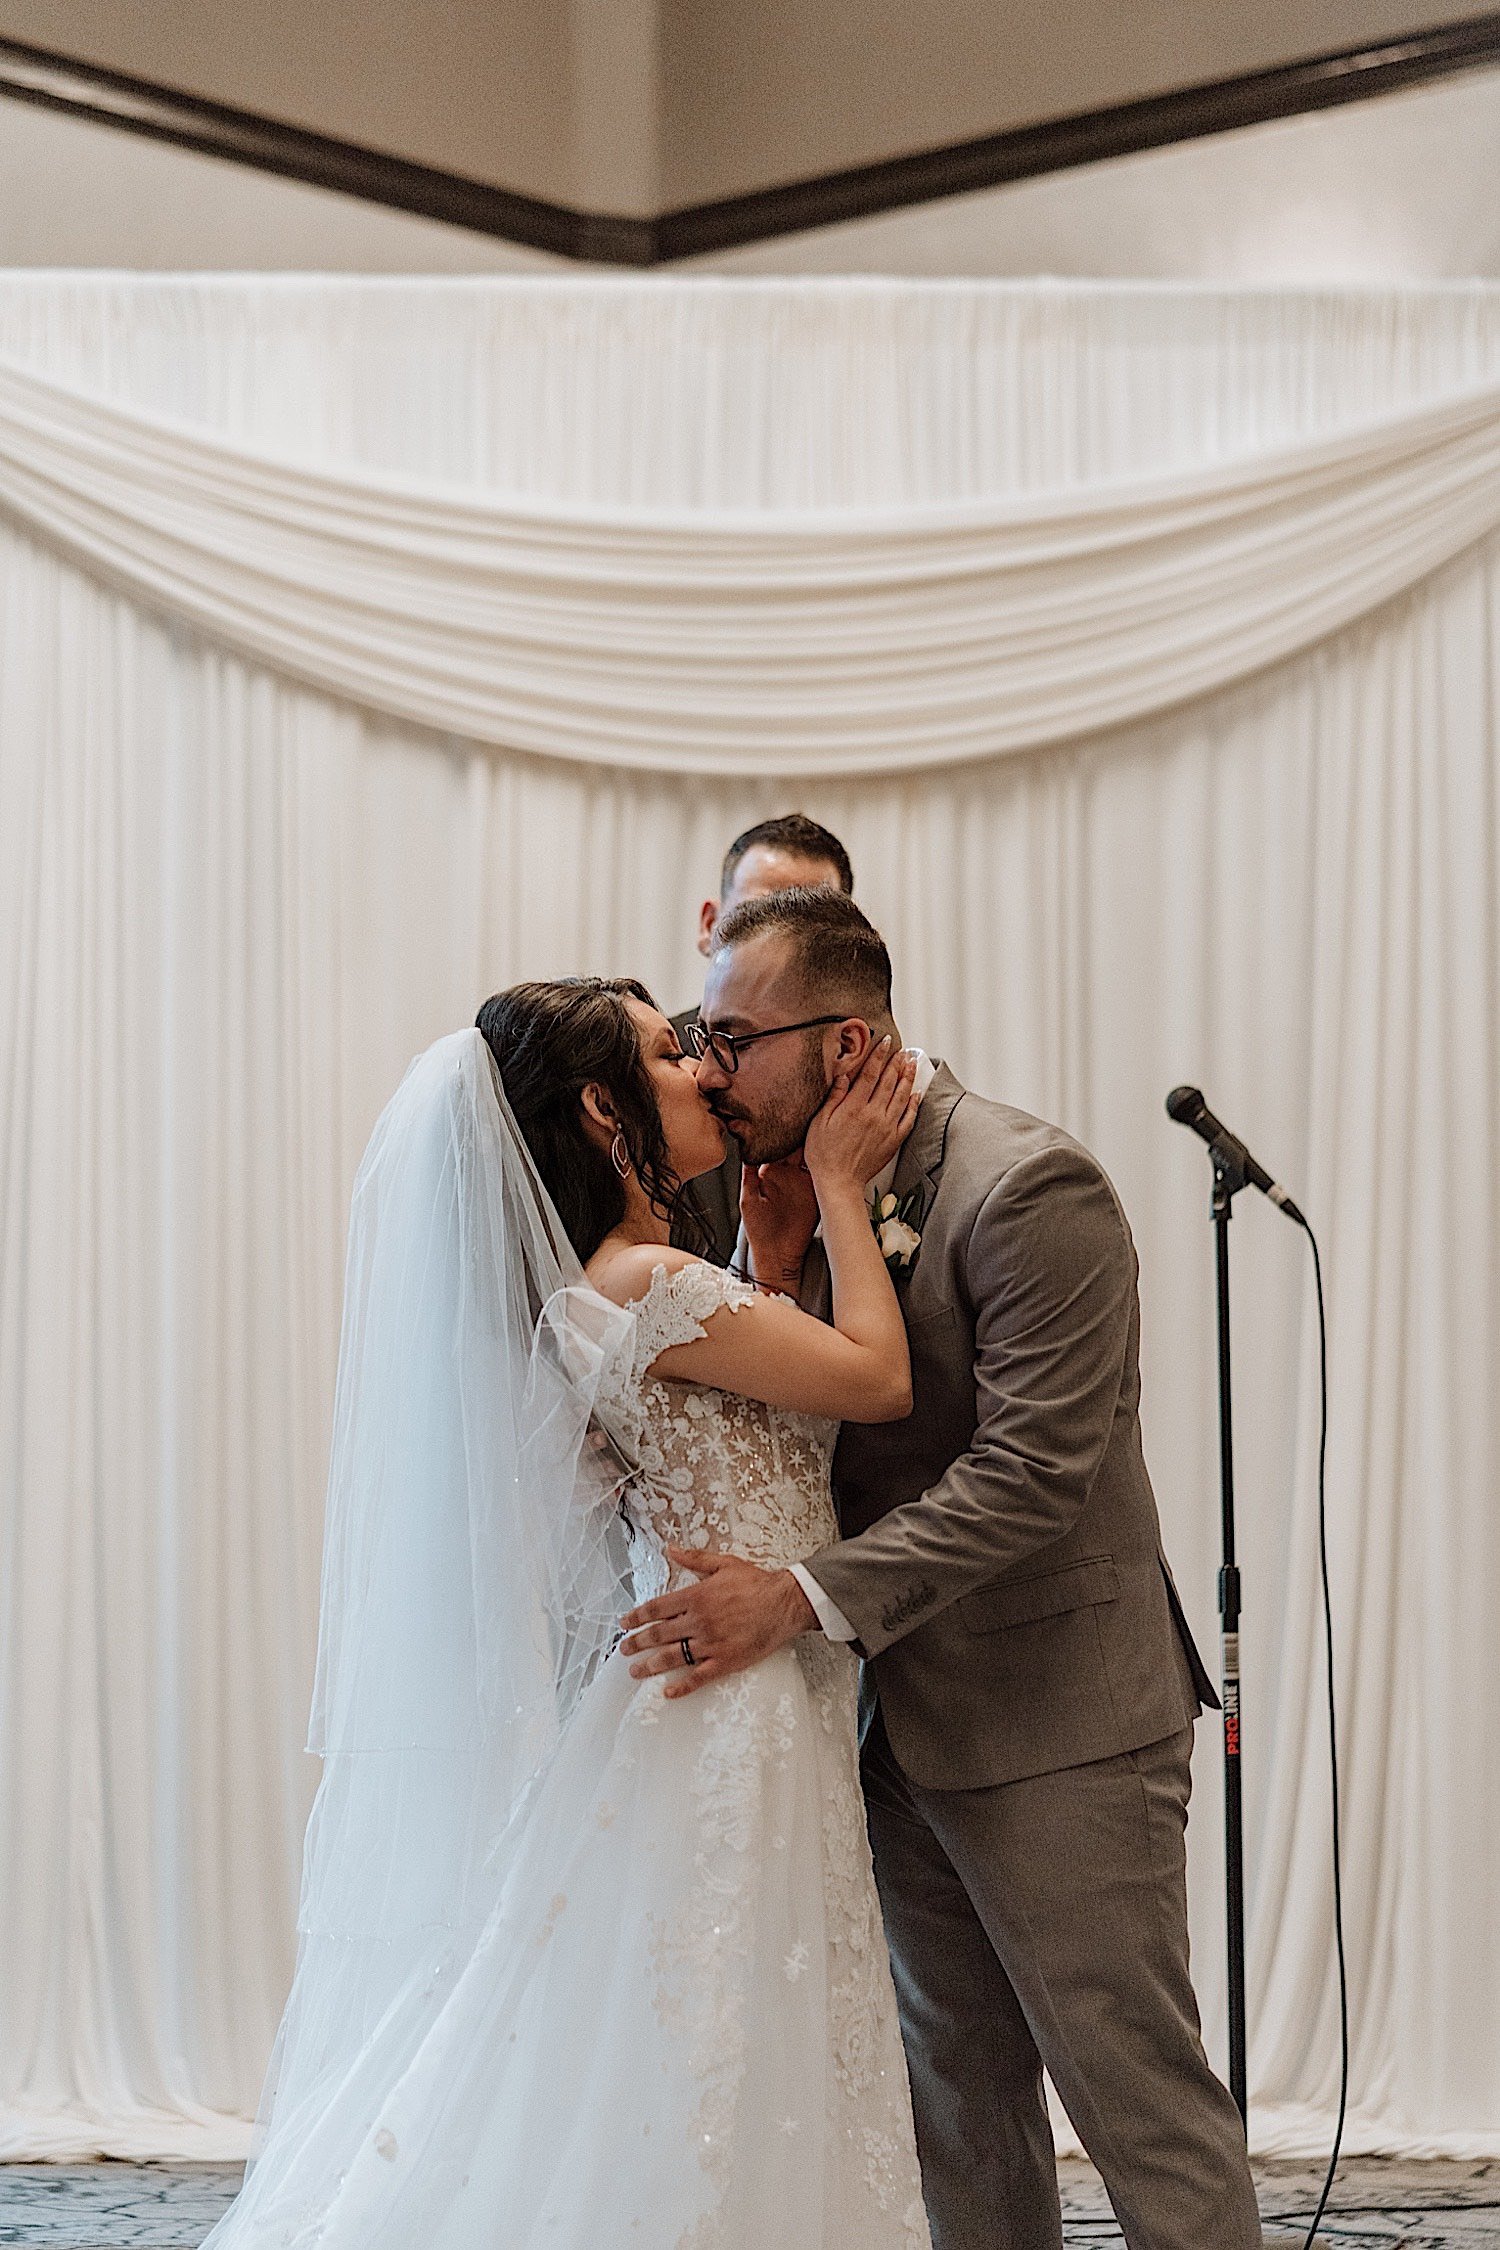 Bride and groom share first kiss during wedding ceremony